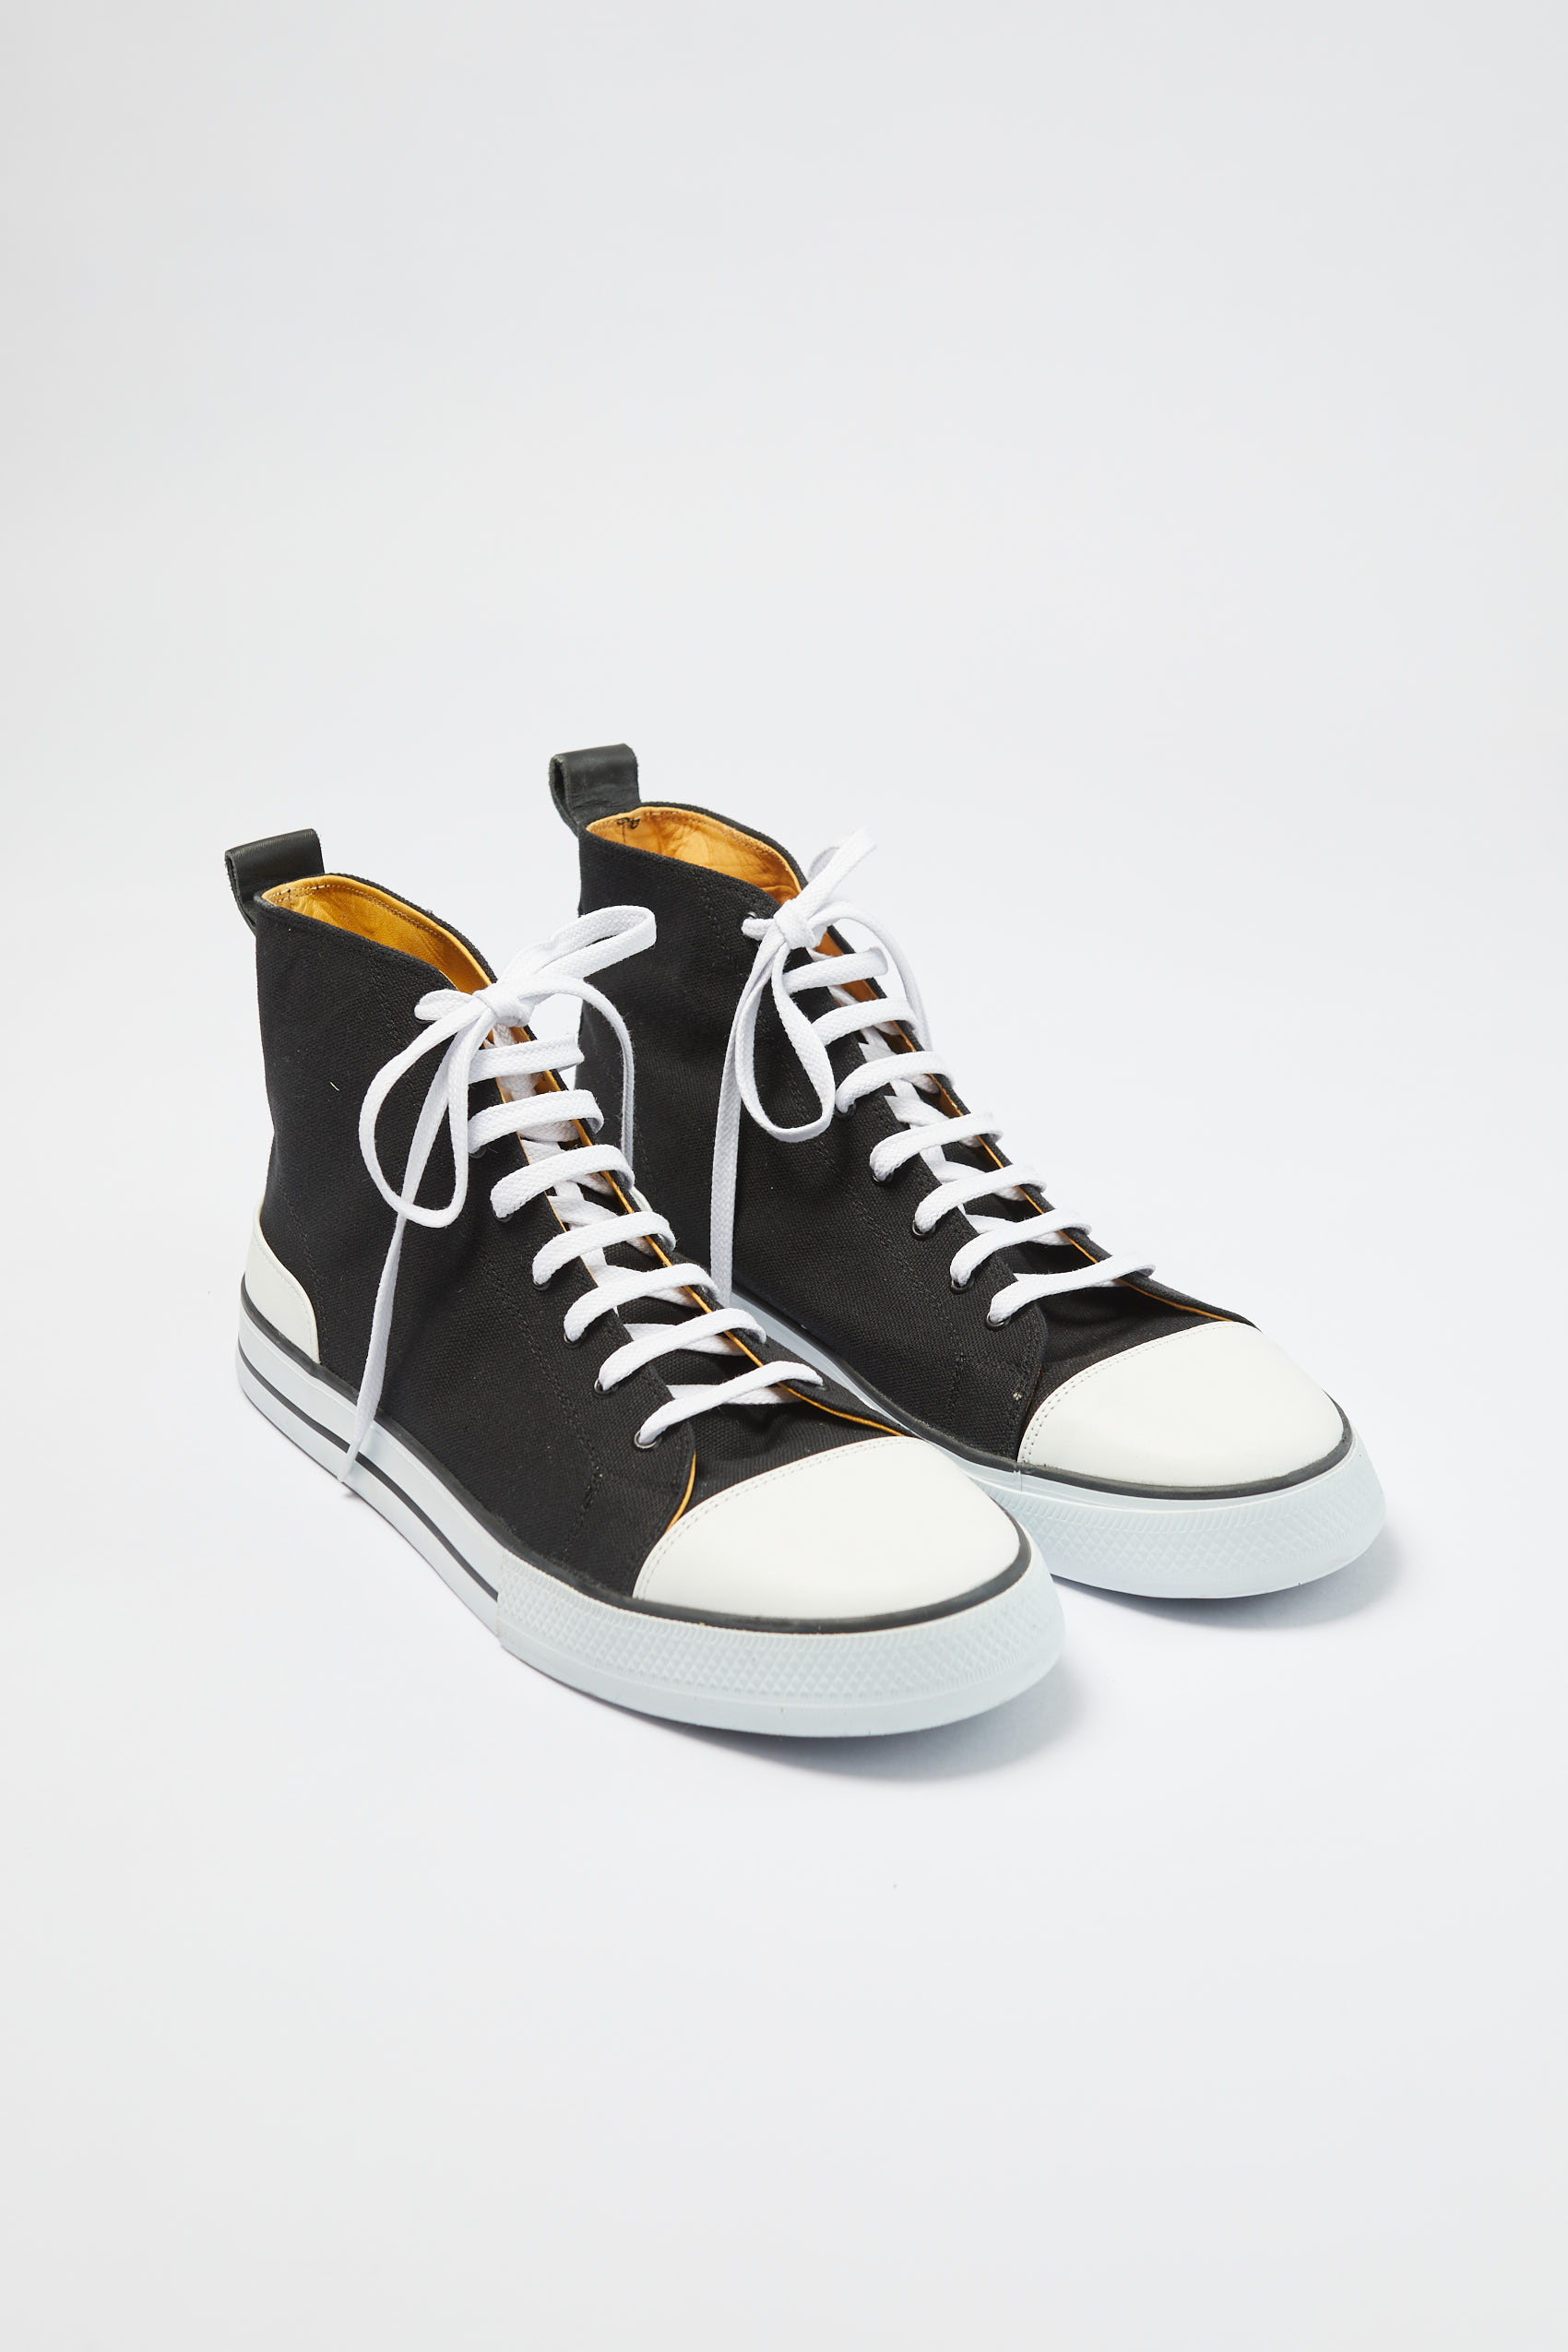 penguin_high-top-twill_46-13-2022__picture-27194